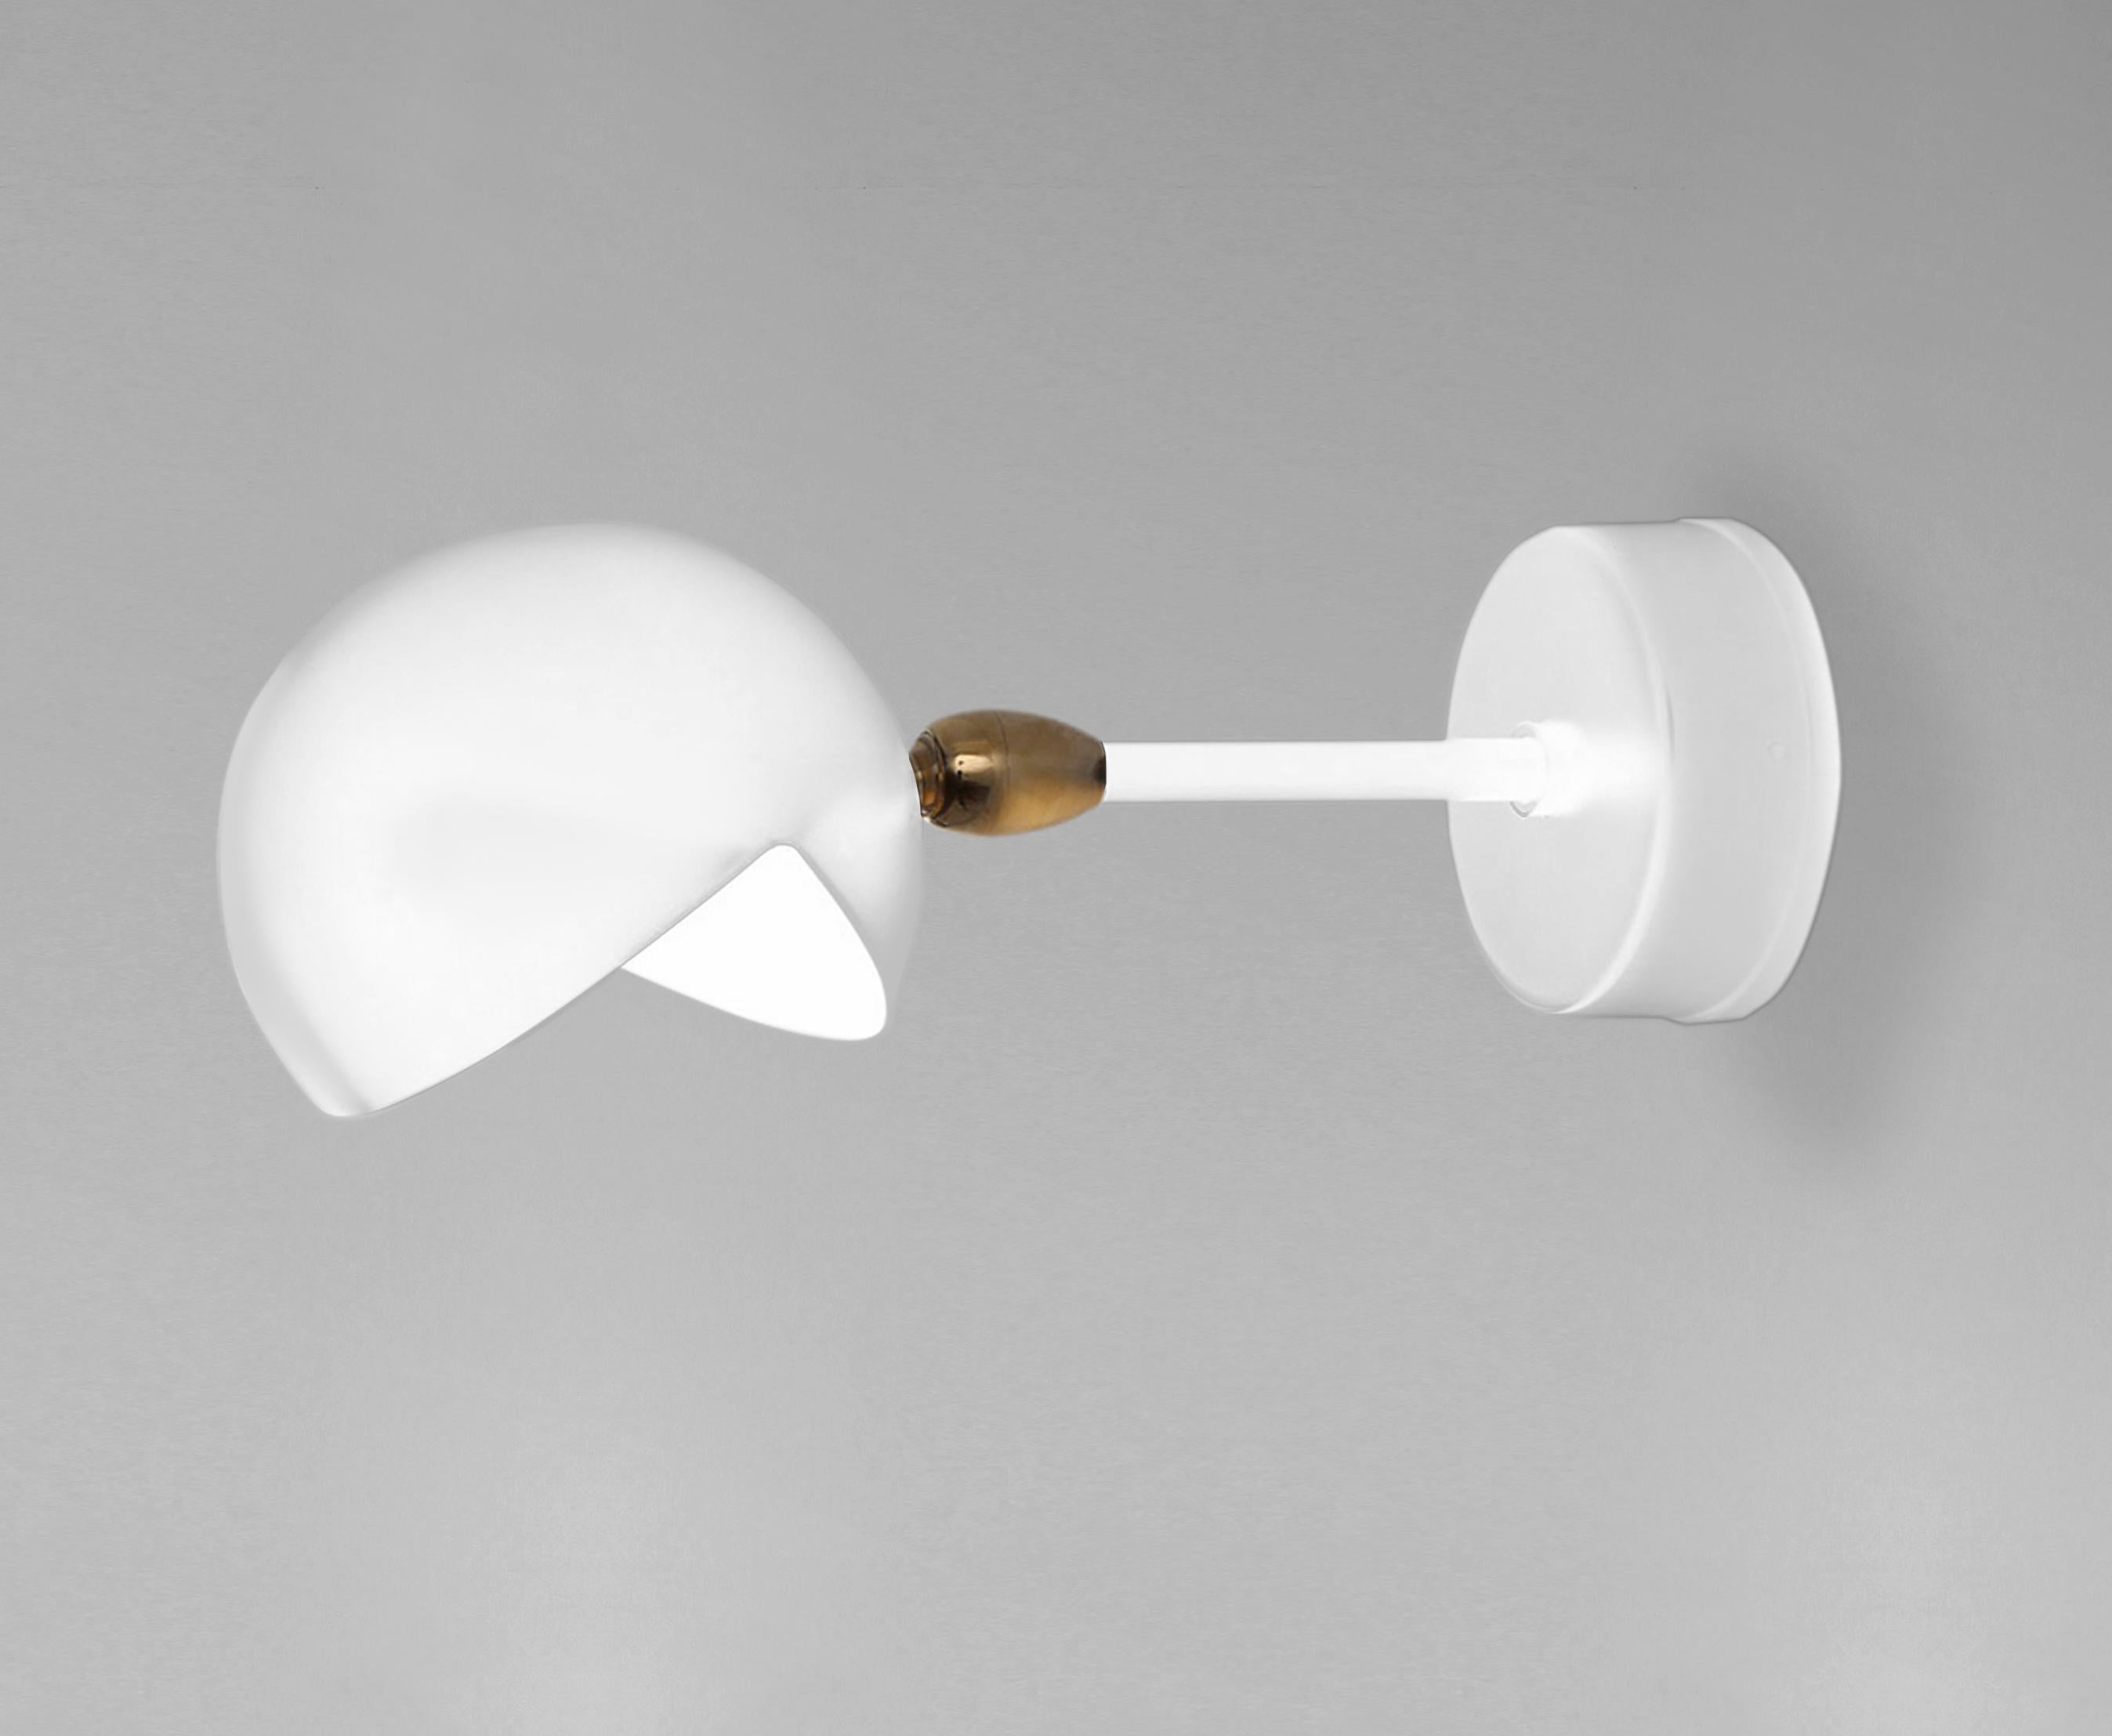 French Serge Mouille Mid-Century Modern White Eye Sconce Wall Lamp